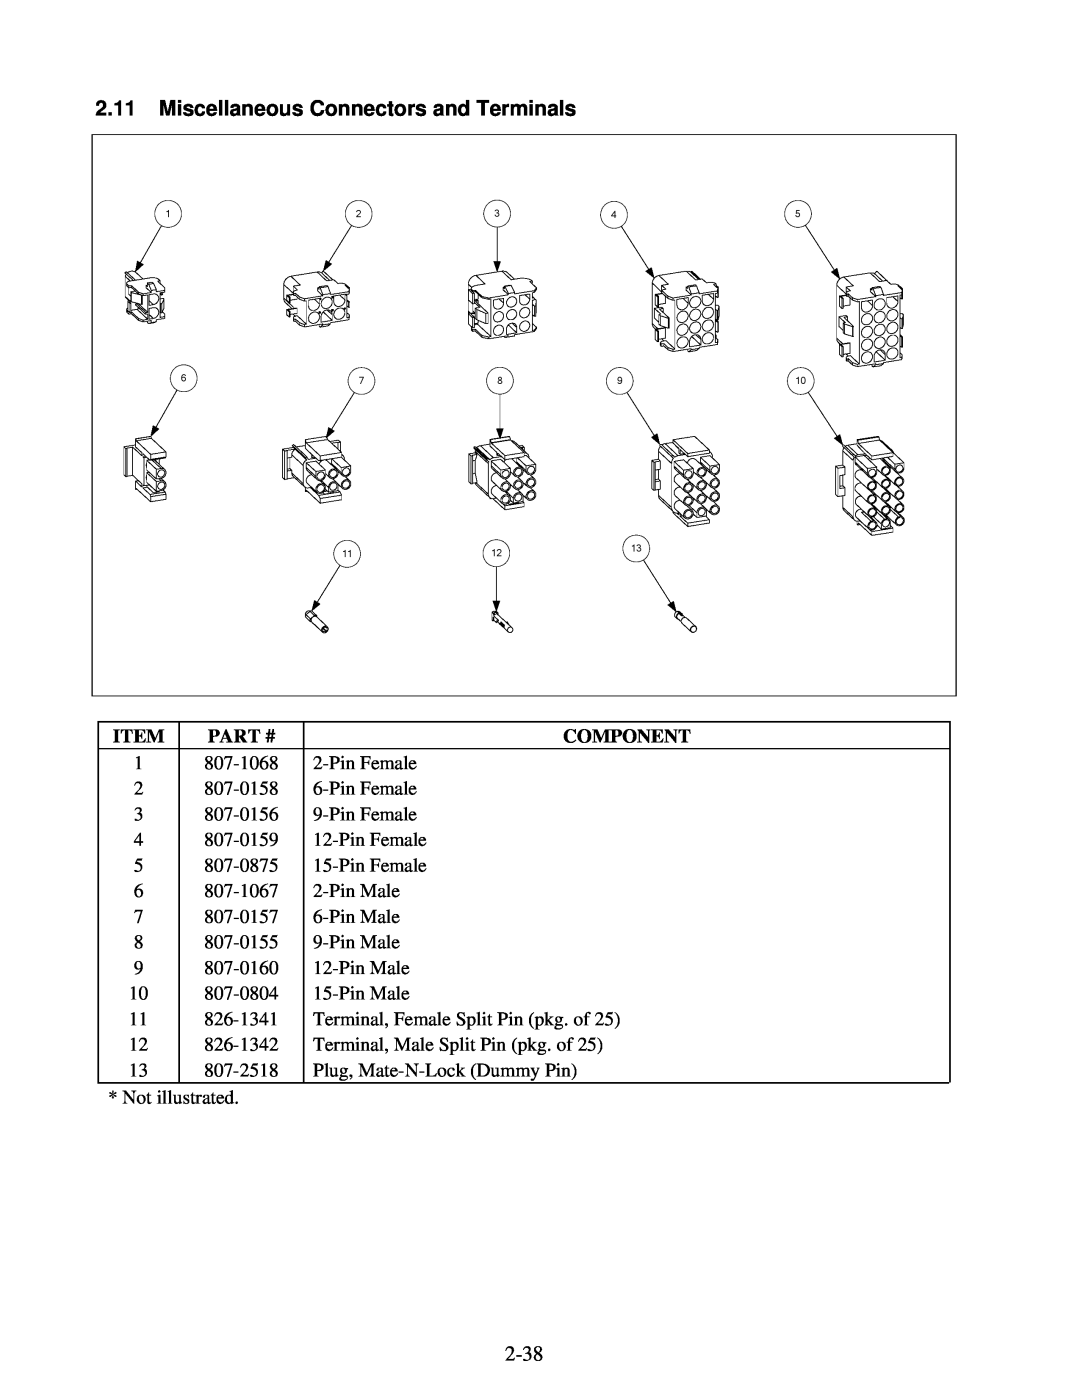 Frymaster H50 manual 2.11Miscellaneous Connectors and Terminals, Component 